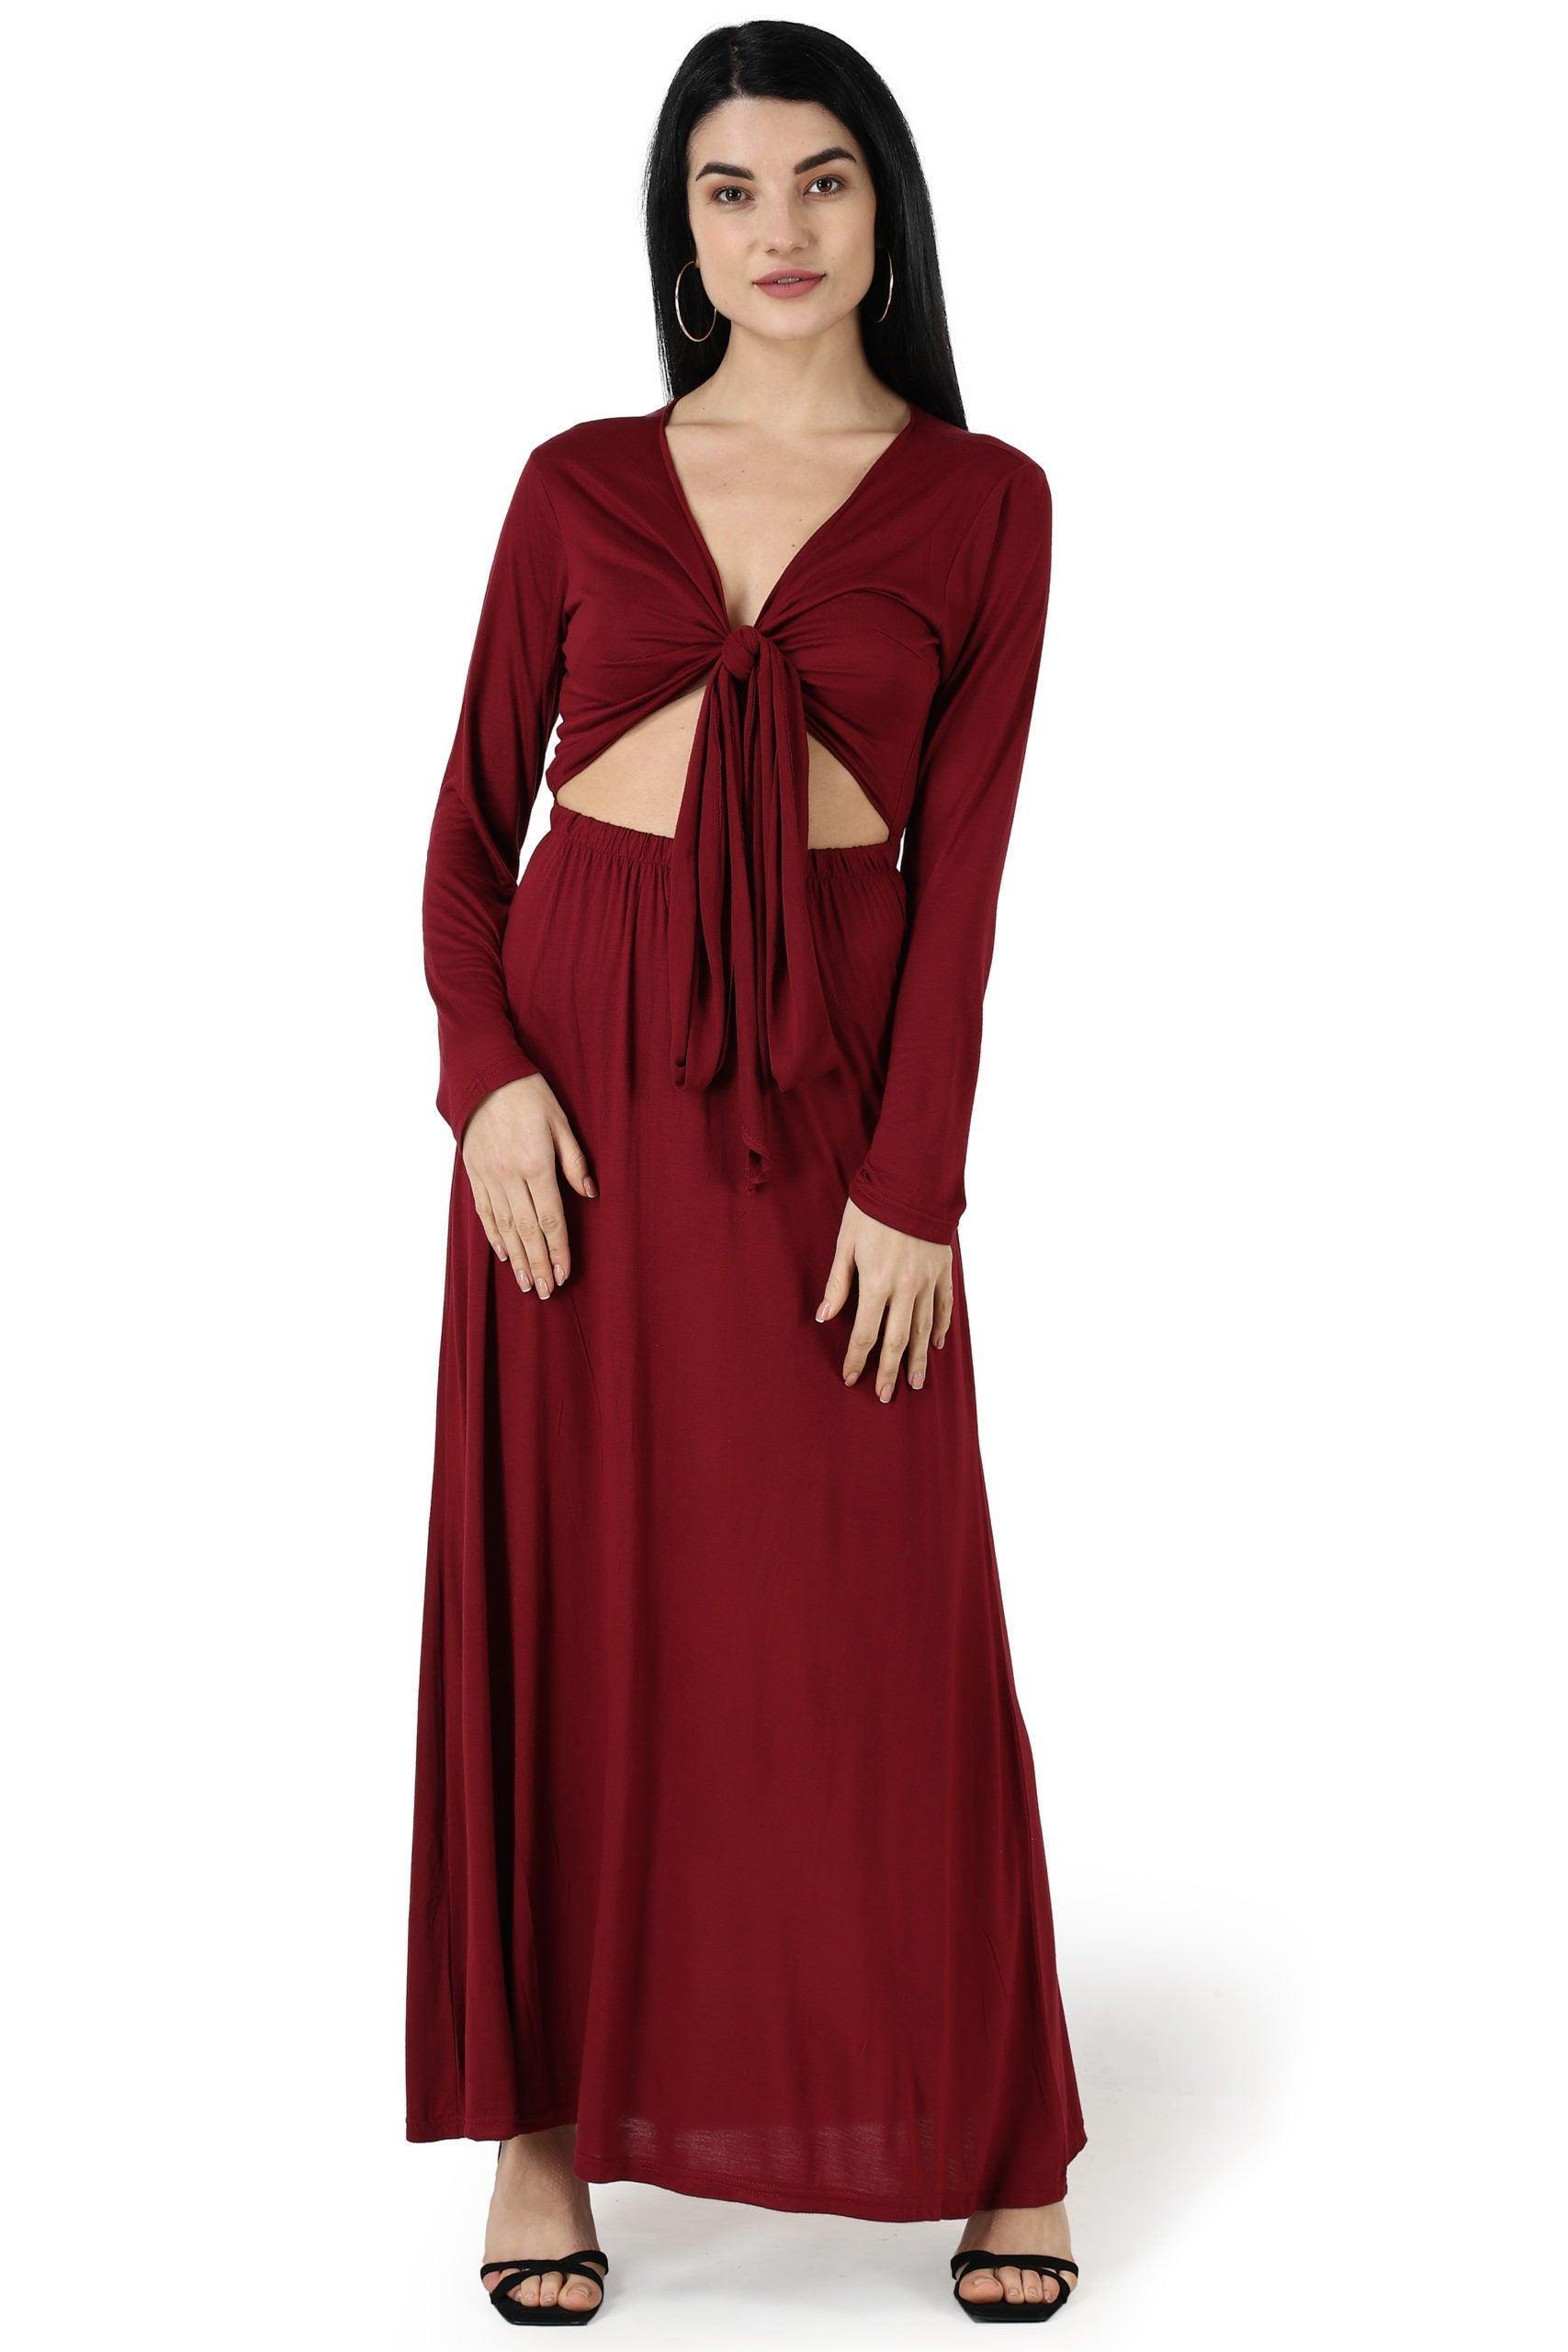 Latest Party Wear Maxi Dresses & Frocks Collection (9) - StylesGap.com